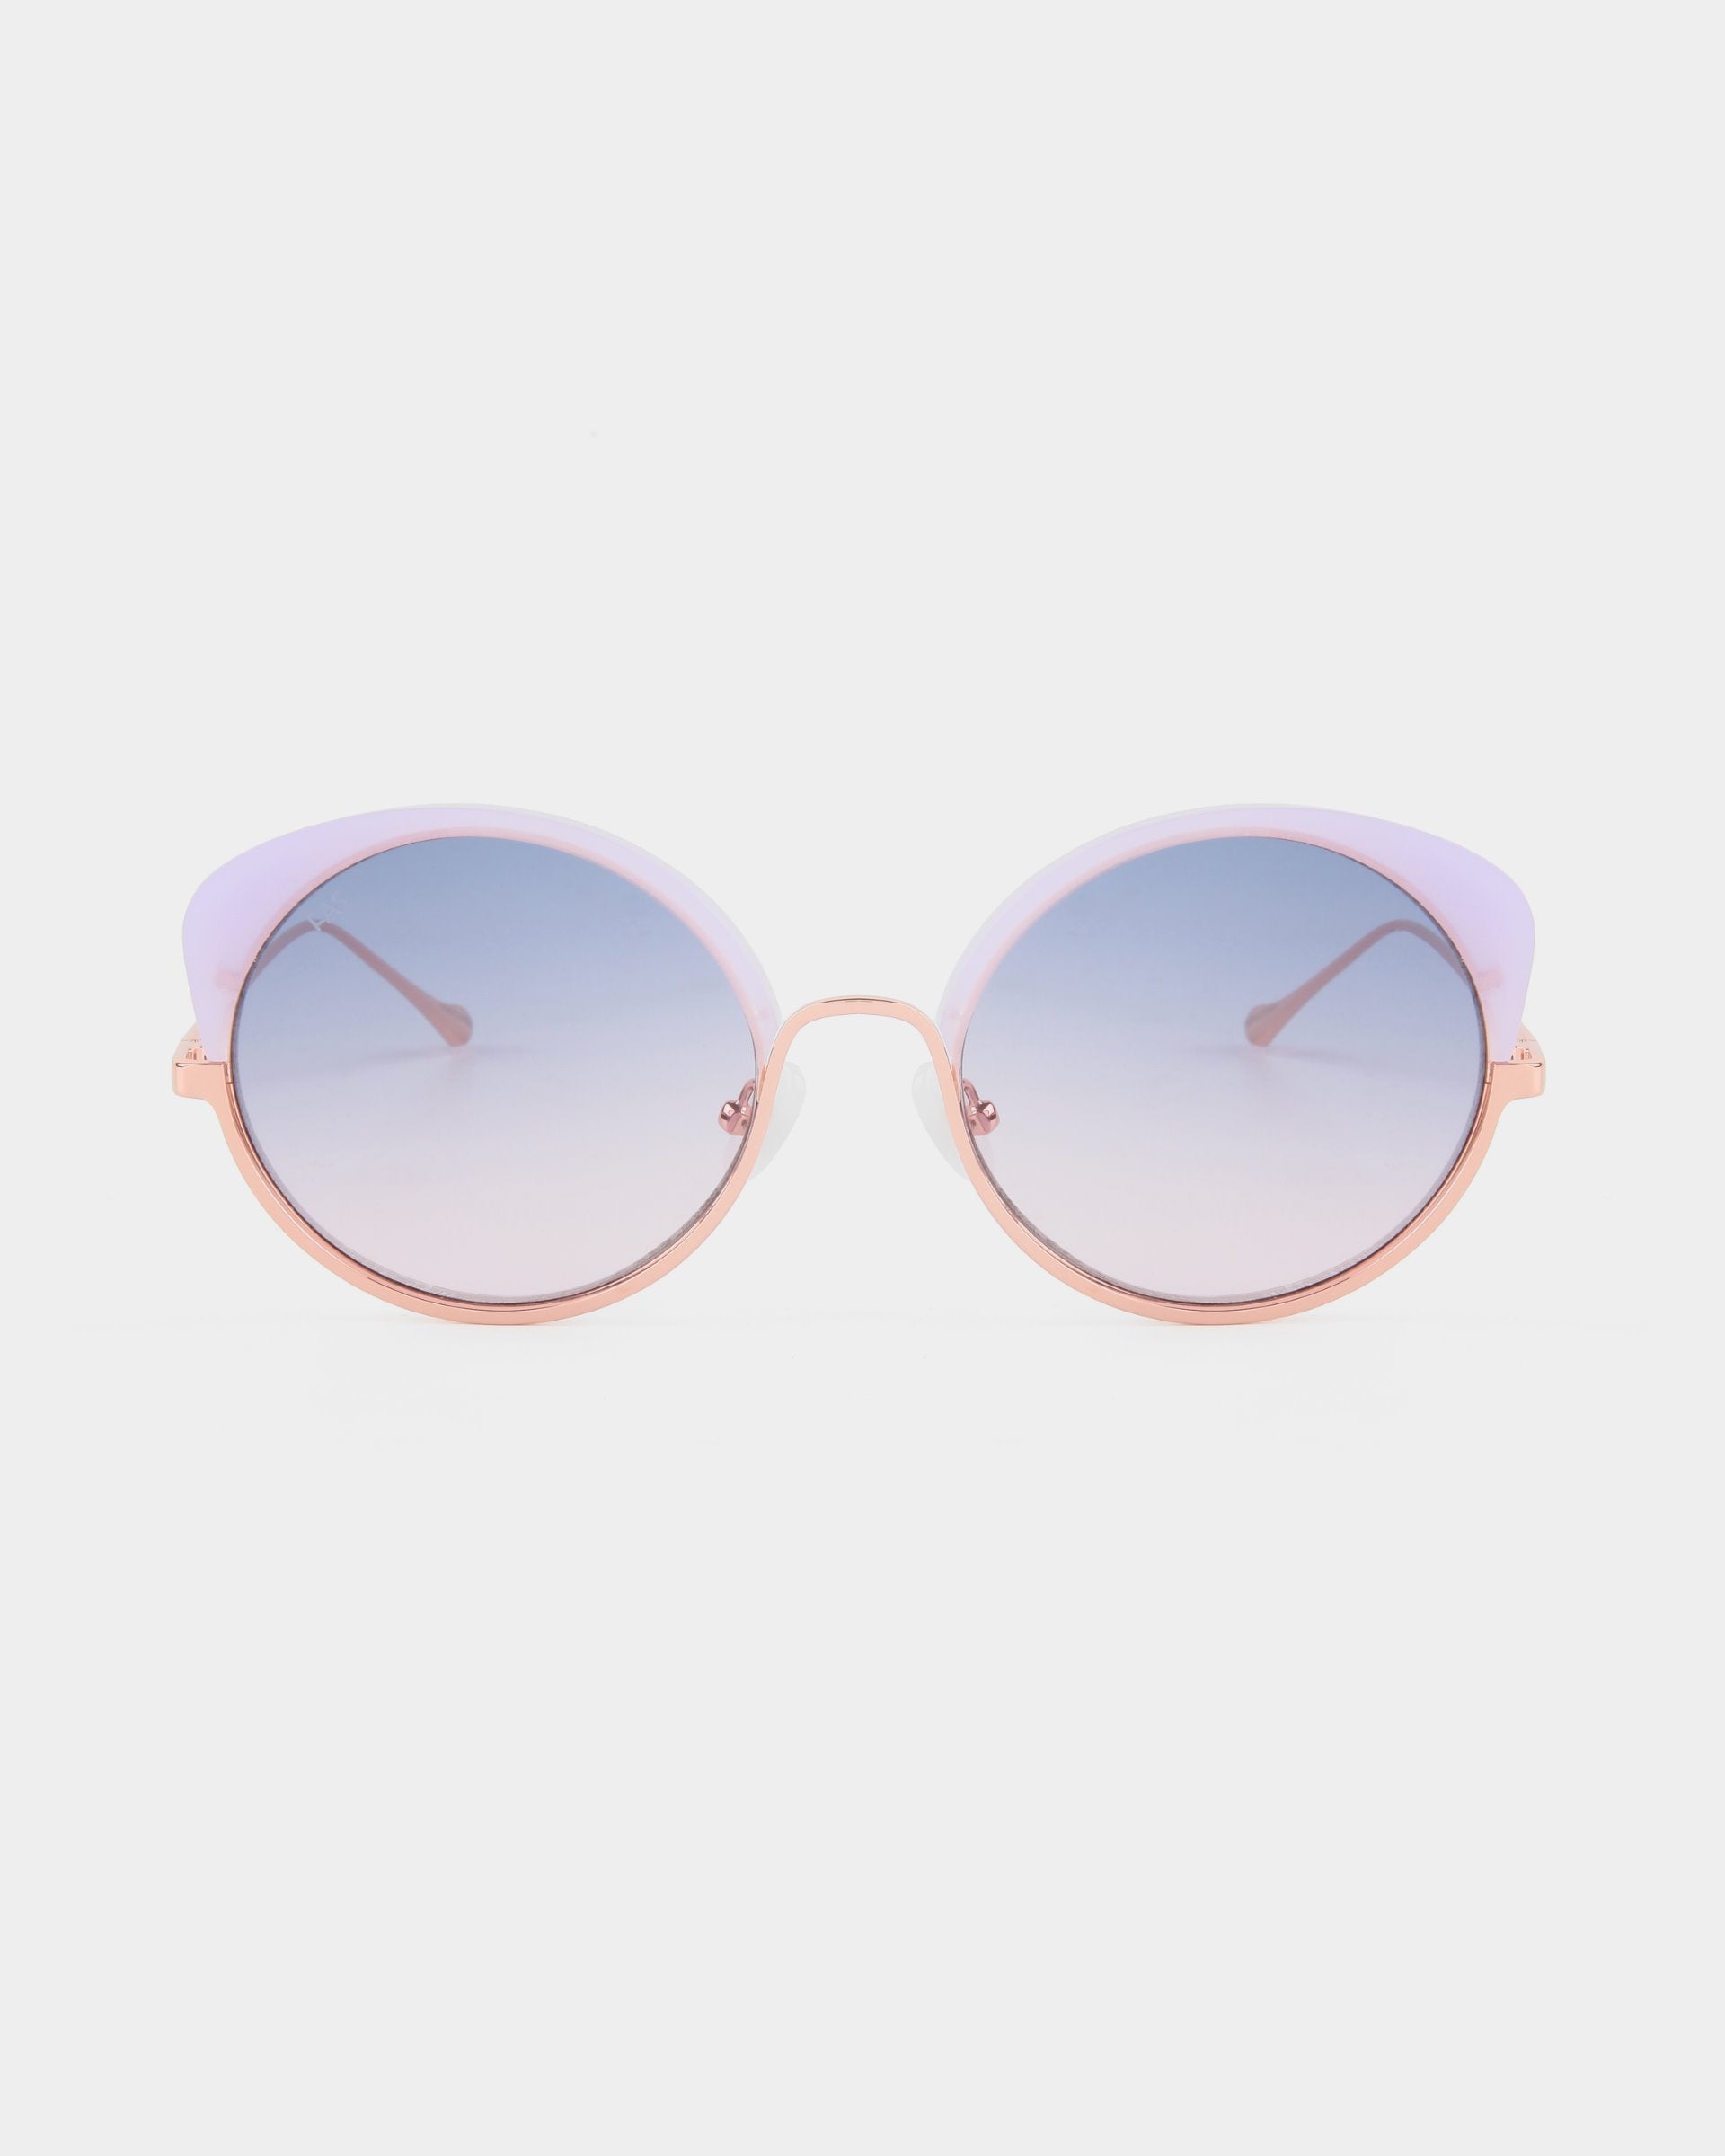 A pair of Cocoon sunglasses from For Art&#39;s Sake® with a gradient lens from blue to clear. The frame is a blend of gold and light purple, with thin gold arms. These handcrafted eyewear pieces offer UV protection and are displayed against a white background.